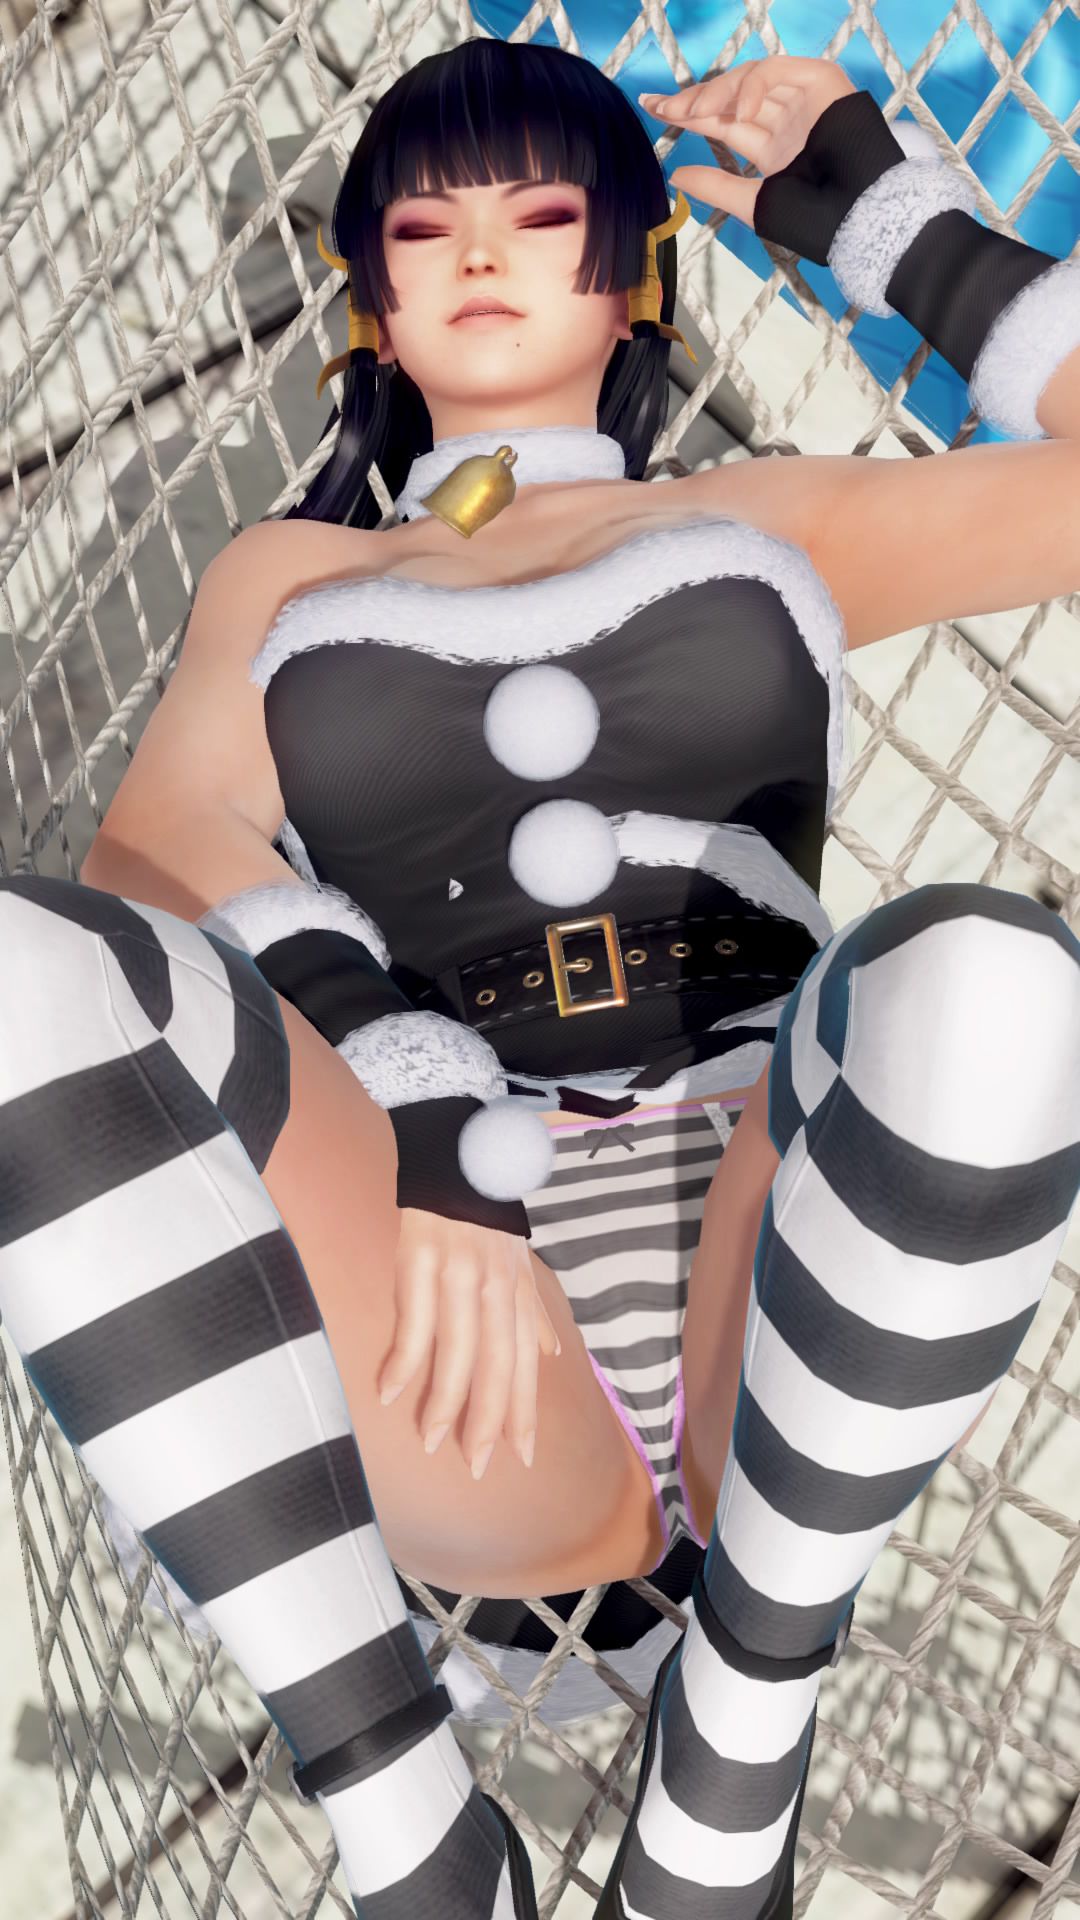 Merry Xmas from DOAX3 South Island! Photo session with new swimsuit Santa 42